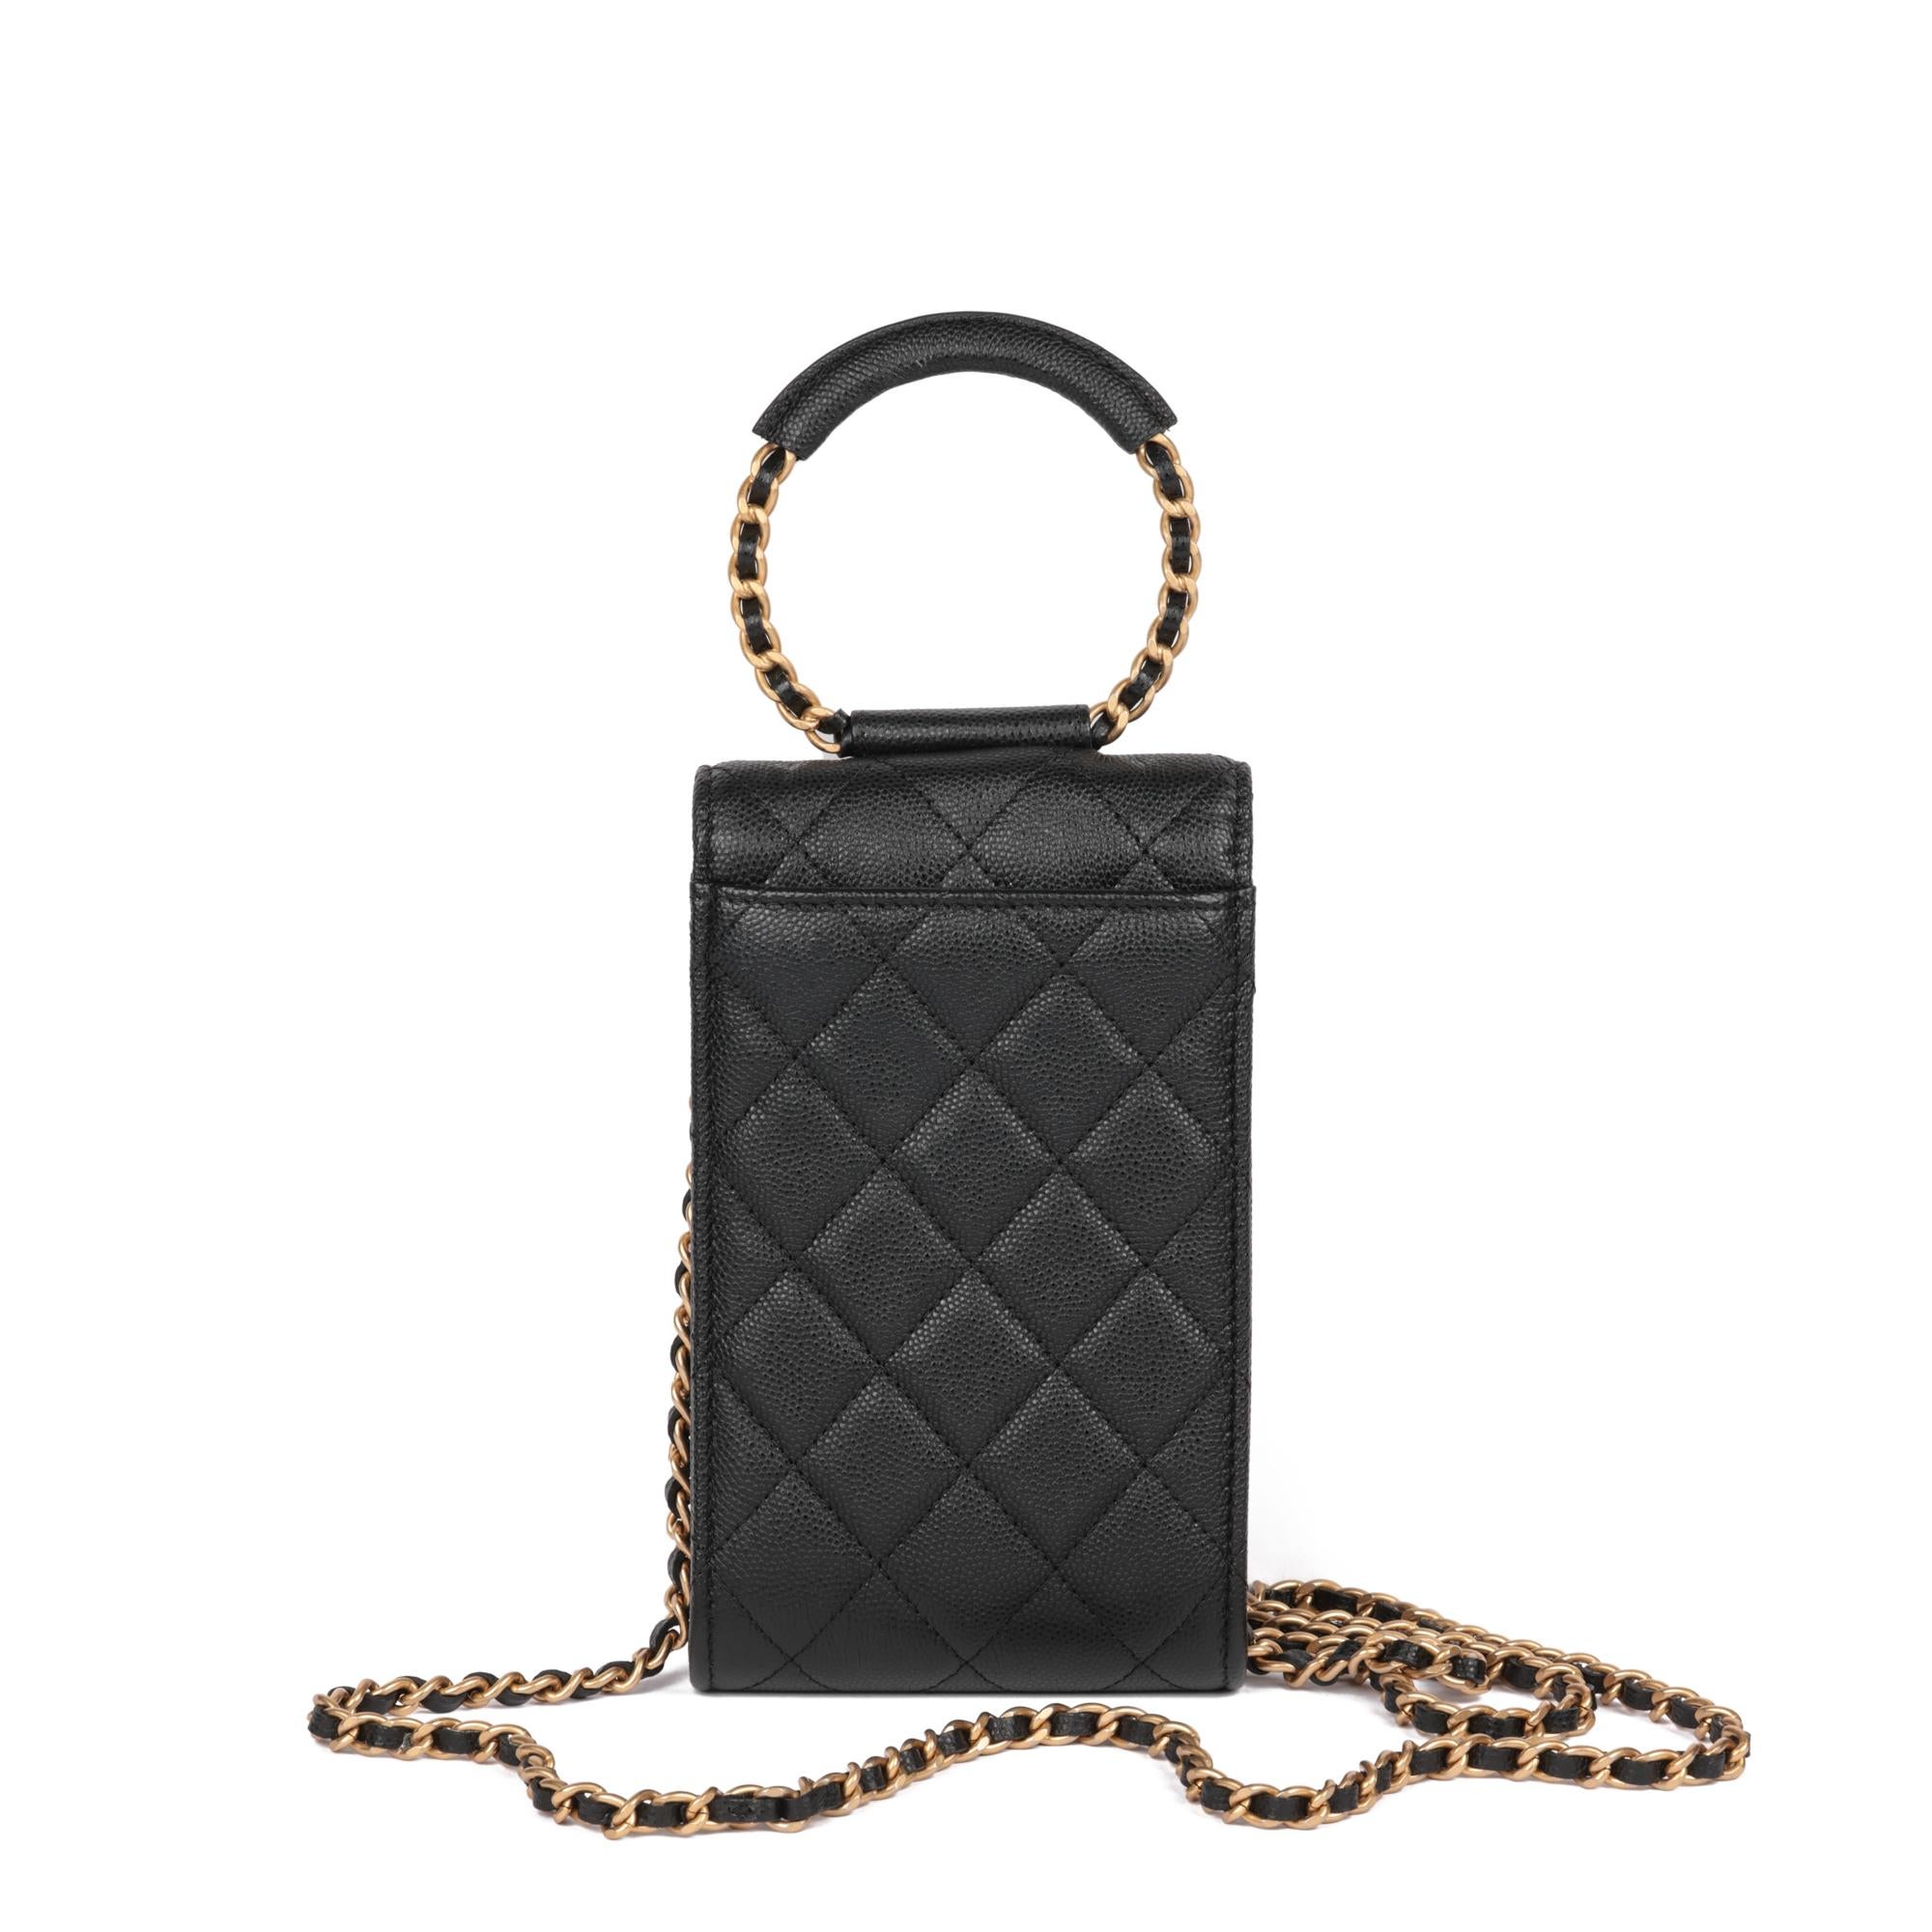 Chanel Black Quilted Caviar Leather In The Loop Phone Holder-with-Chain

ITEM CONDITION	Very Good
XUPES REFERENCE	CAA0054
MANUFACTURER	Chanel
MODEL	The Loop Phone Holder-with-Chain
AGE	2019
GENDER	Women's

The exterior is in very good condition with